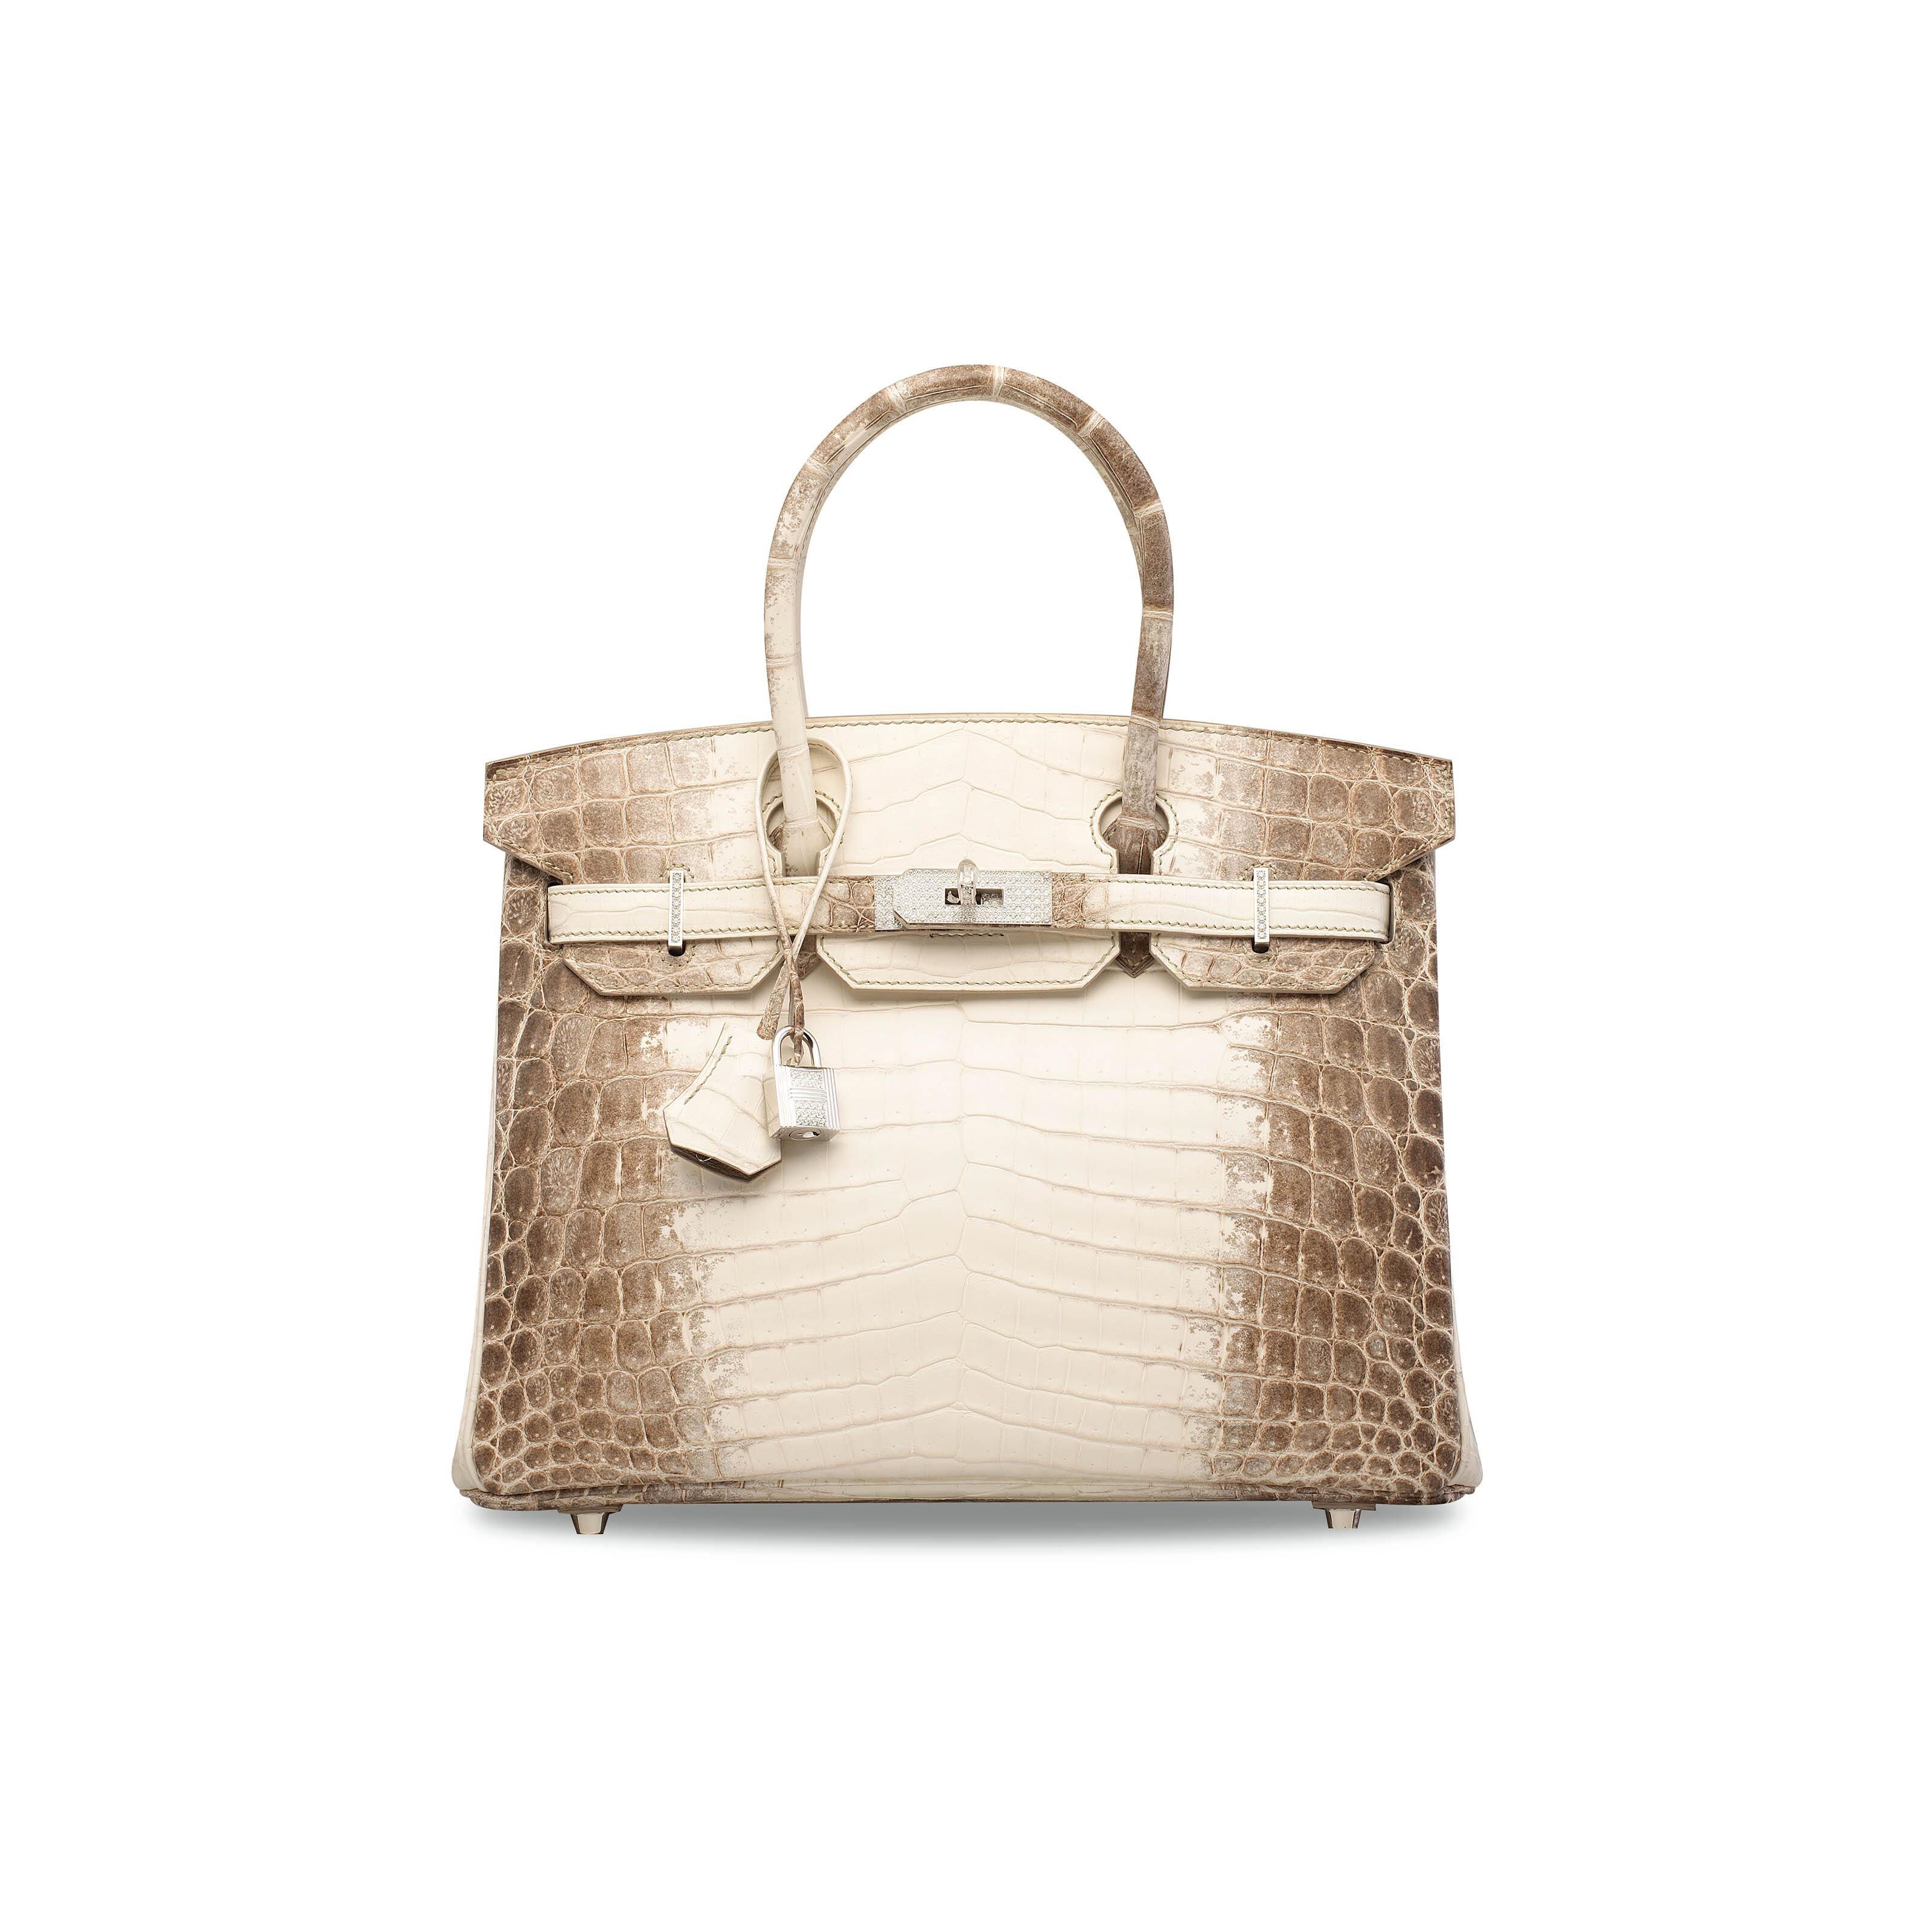 Birkin: The handbags that are worth more than gold